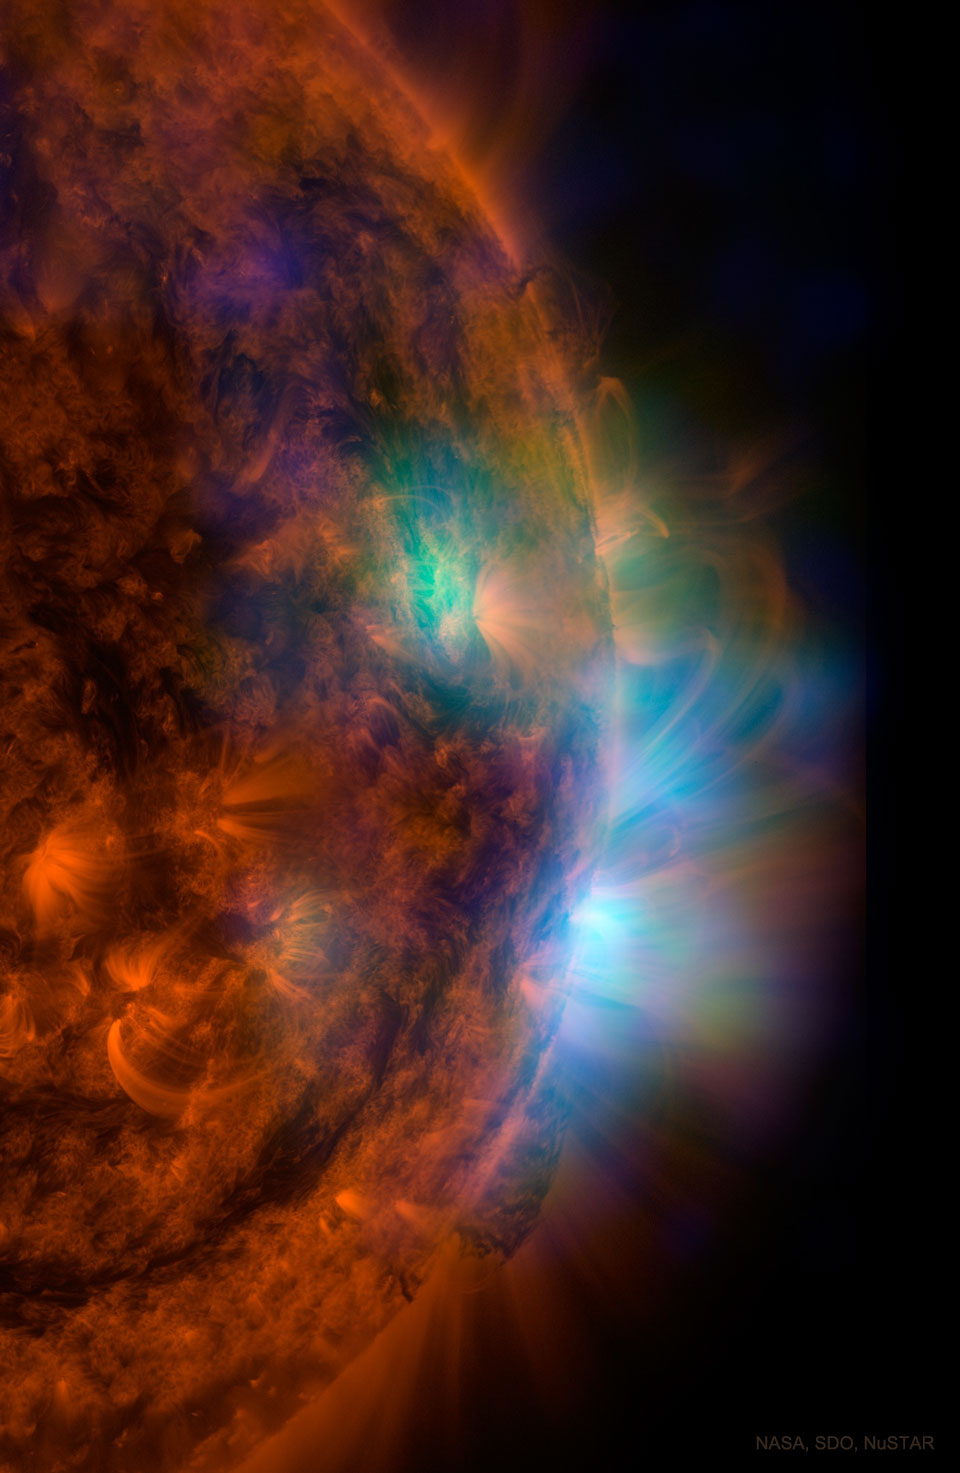 The featured image shows the Sun in X-ray light as
shown by NASA's NuSTAR satellite -- superimposed on an image
in ultraviolet light taken by NASA's Solar Dynamic Observatory.
Please see the explanation for more detailed information.